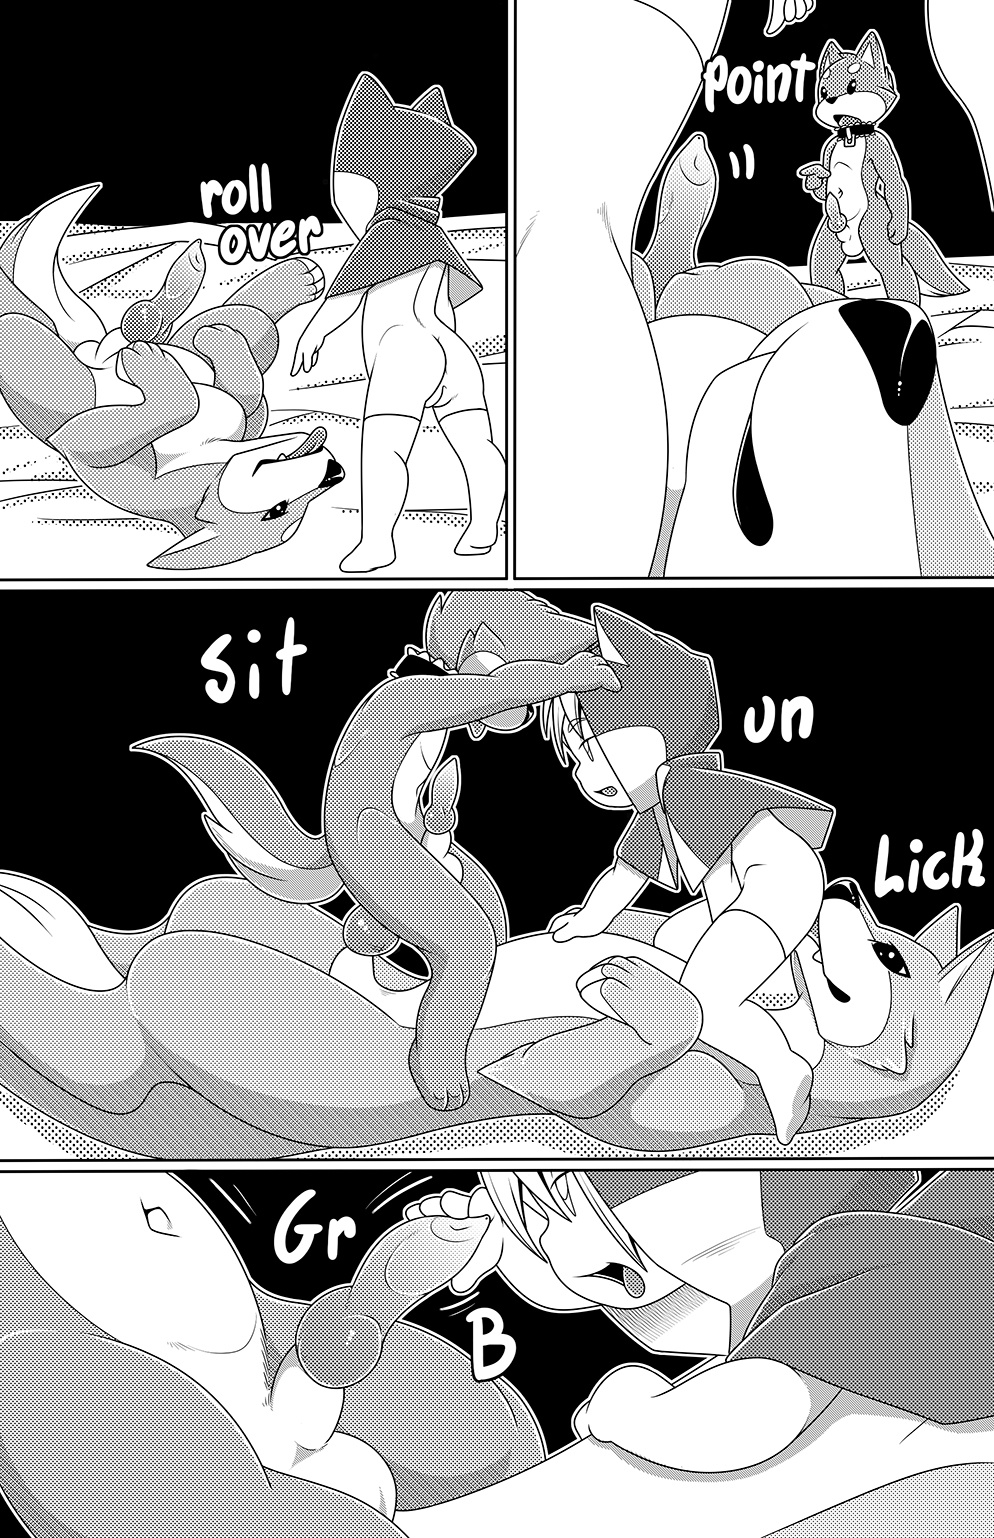 Knotty Pup porn comics Oral sex, Anal Sex, Bestiality, Blowjob, Cum Swallow, Double Penetration, Furry, Group Sex, Lolicon, Stockings, Straight, X-Ray